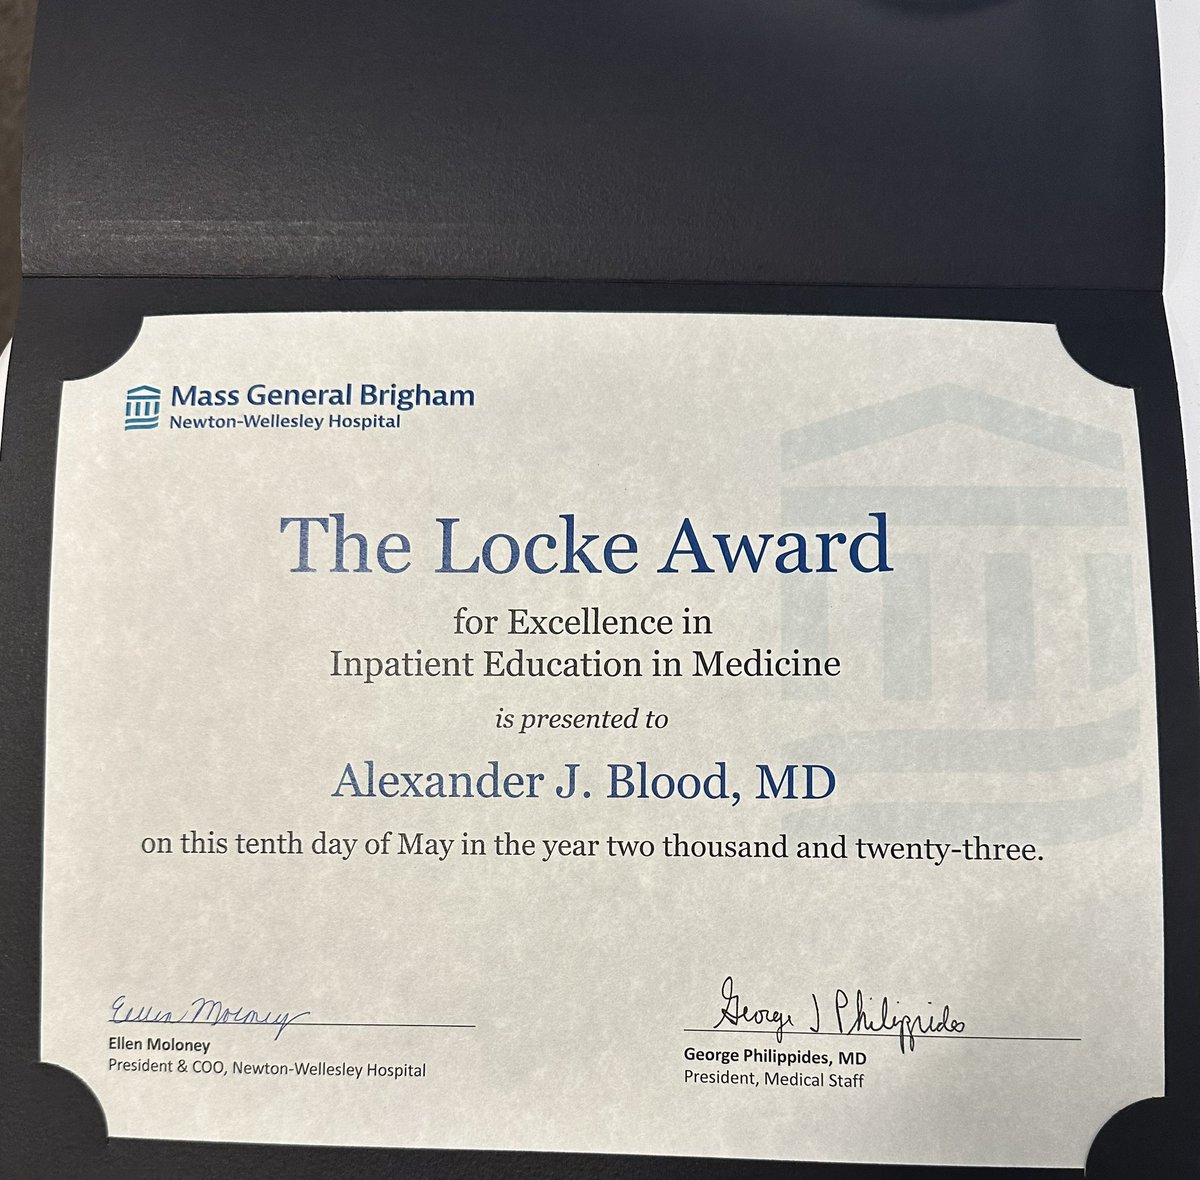 Really excited to have been honored with the Locke teaching award by @mghmedres and @TuftsMedicine residents for inpatient education - high quality patient care and fantastic learners at @newtonwellesley !